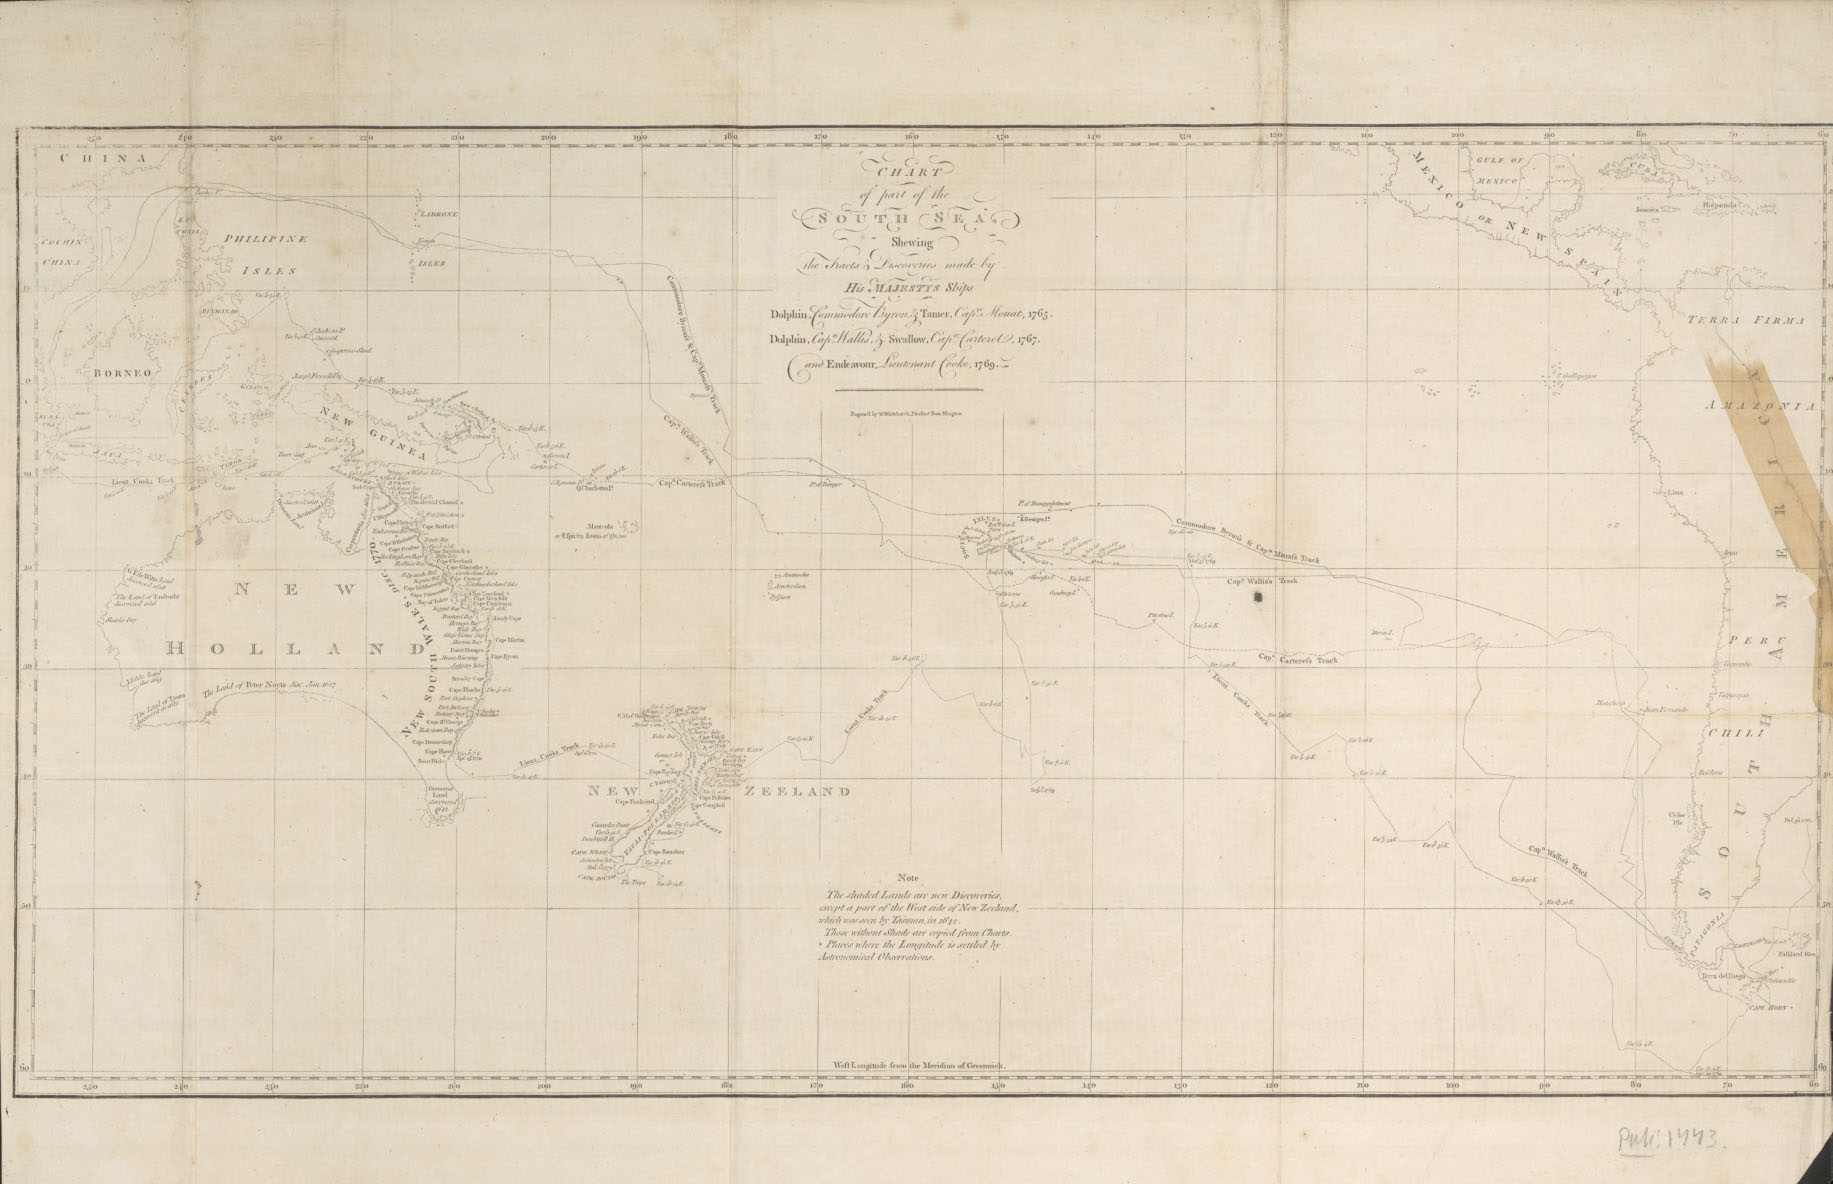 A map based on Captain James Cook's first Endeavour voyage.